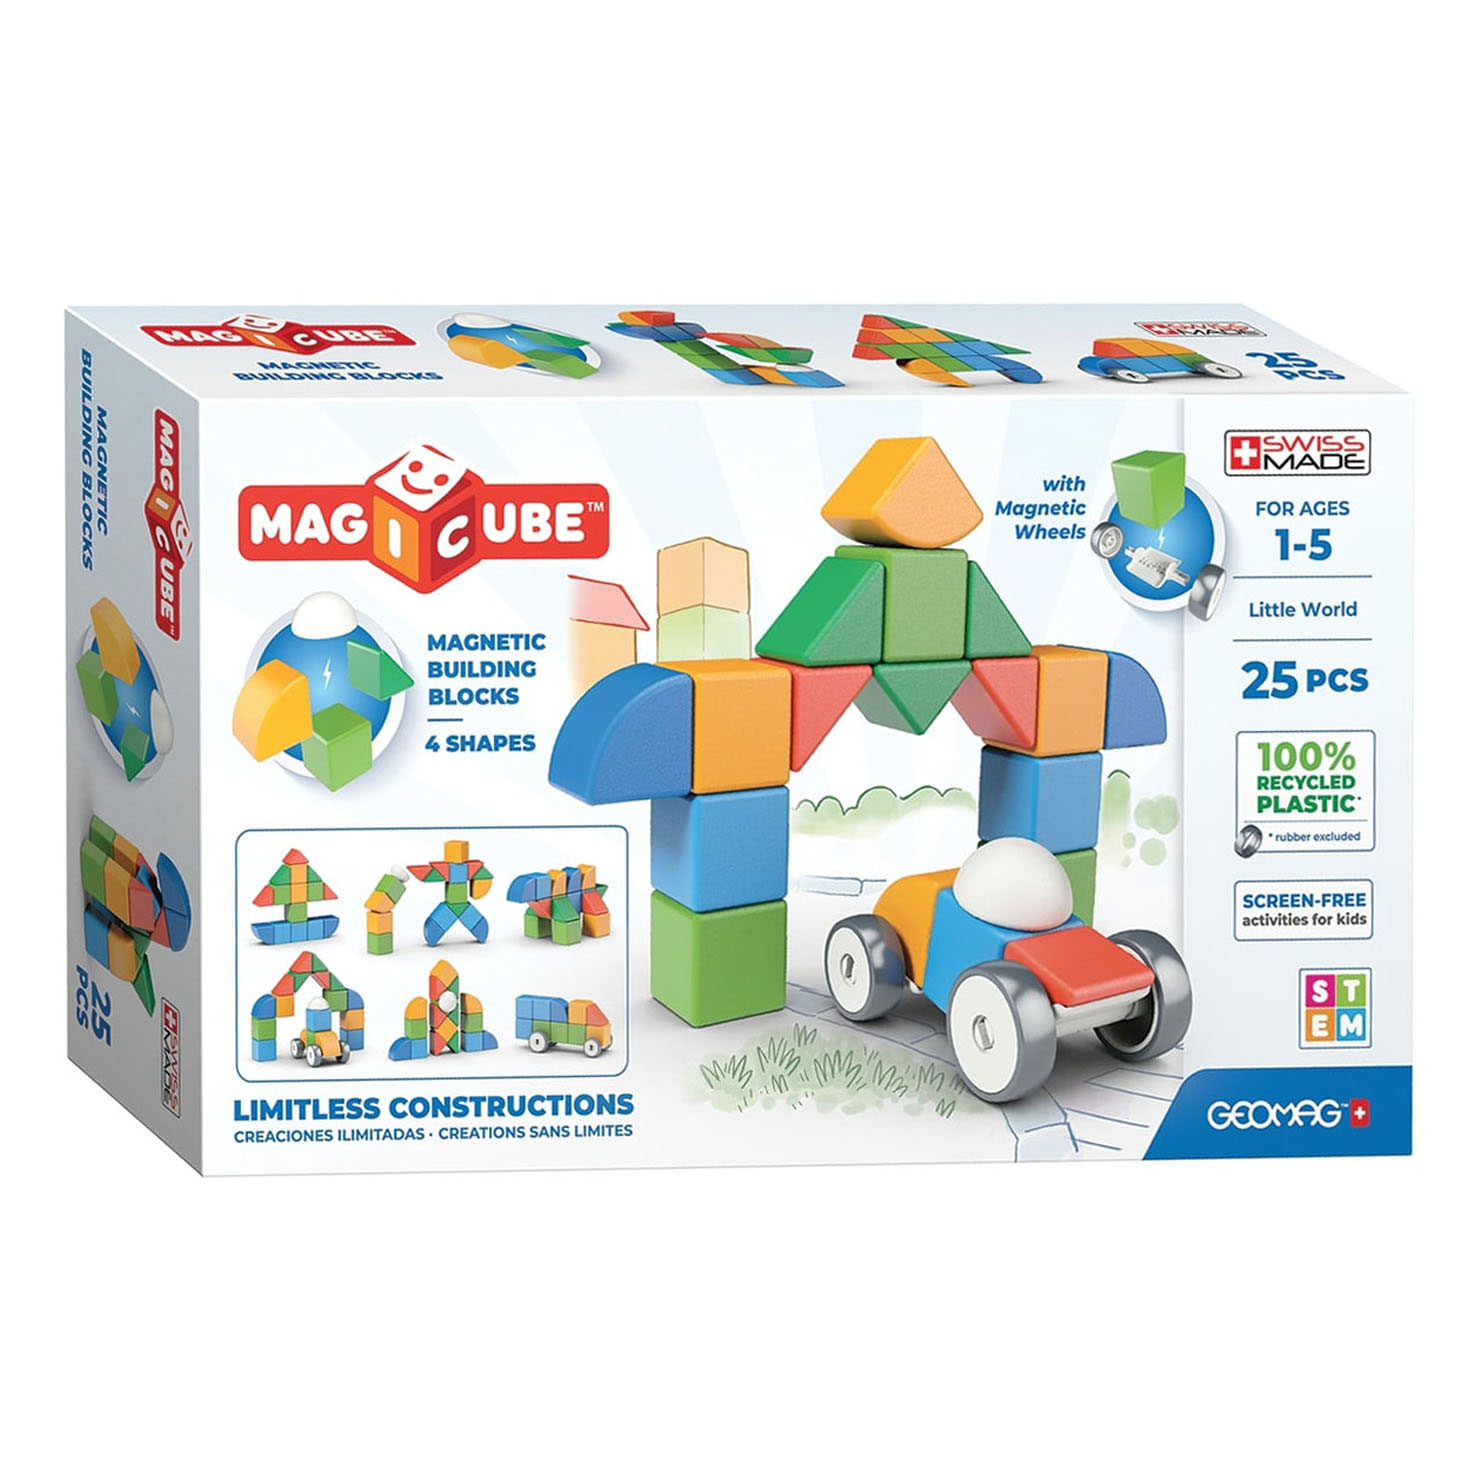 Geomag Magicube 4 Shapes Recycled Little World